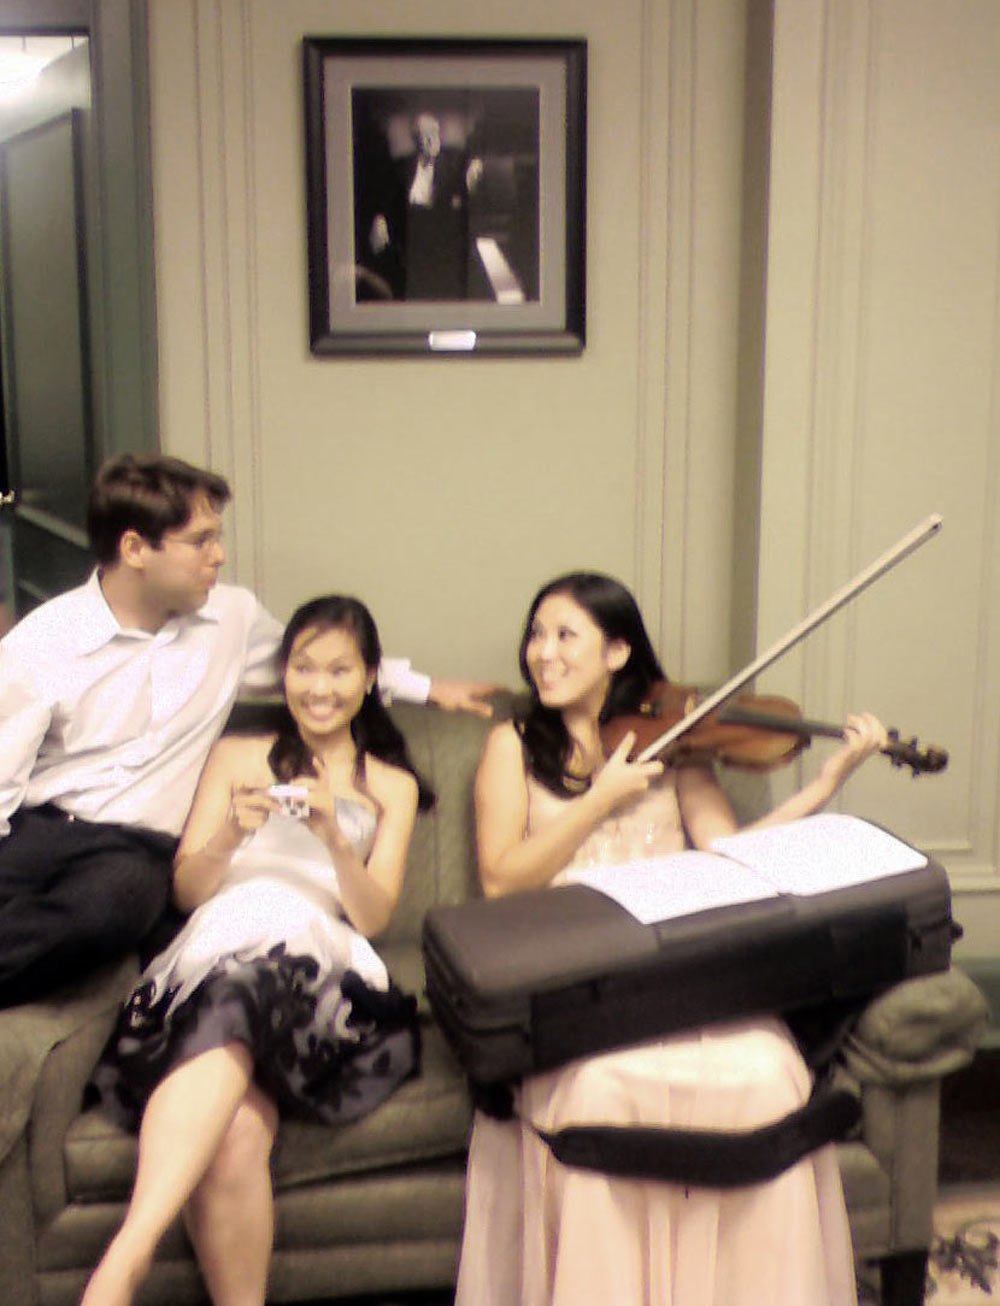 Victor, Heeyeon, and Yeolim in the green room before a concert of Mahle's music at Steinway Hall, New York, NY